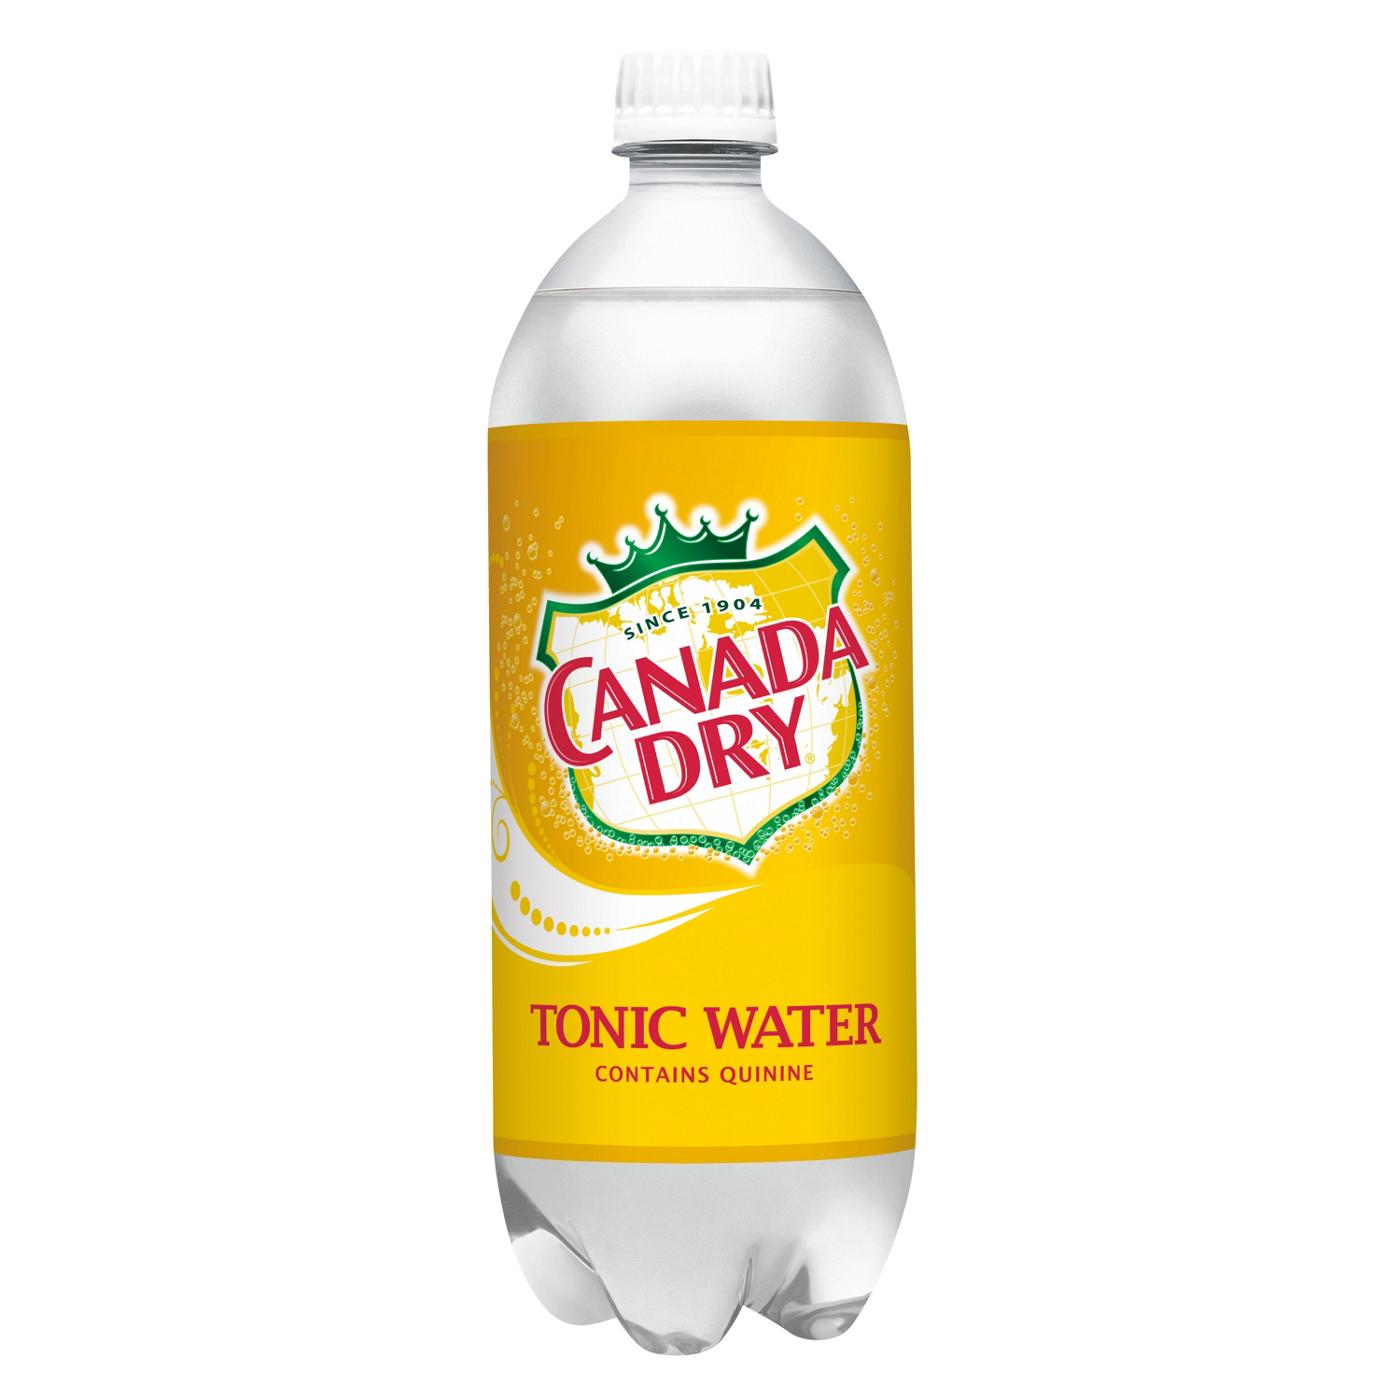 Canada Dry Tonic Water; image 1 of 2